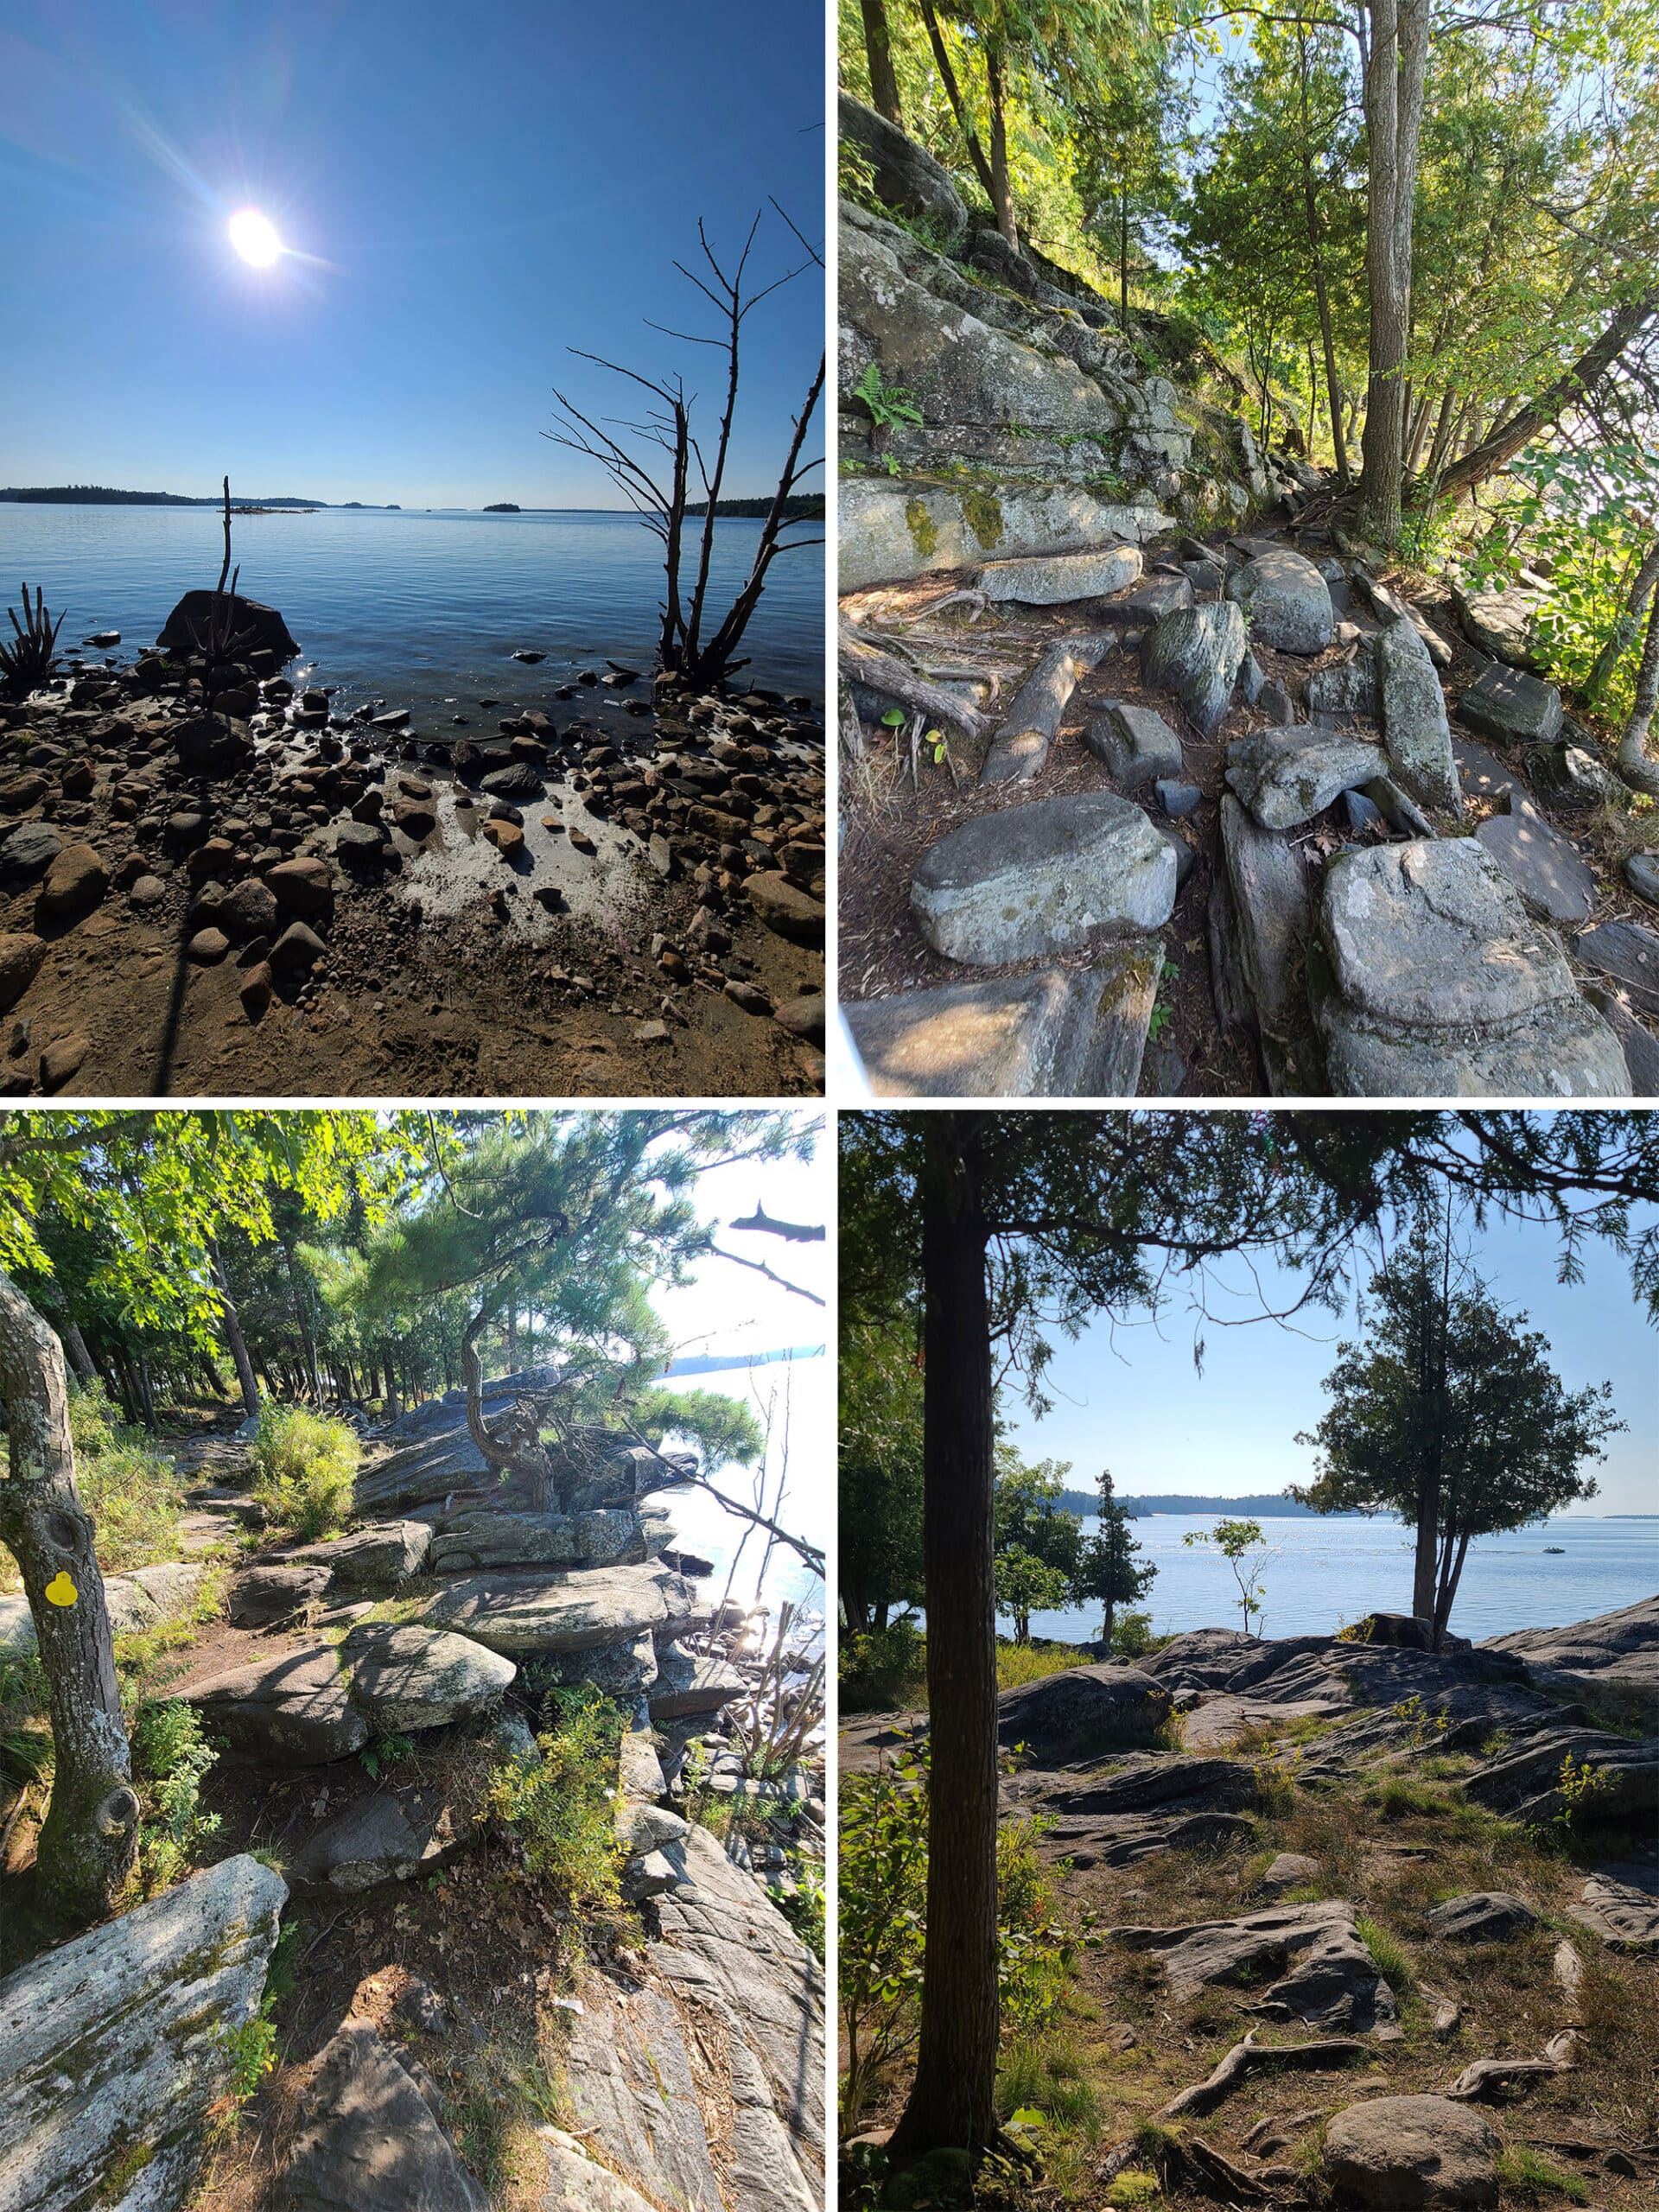 4 part image showing rocky and shoreline views from the lighthouse point hiking trail.